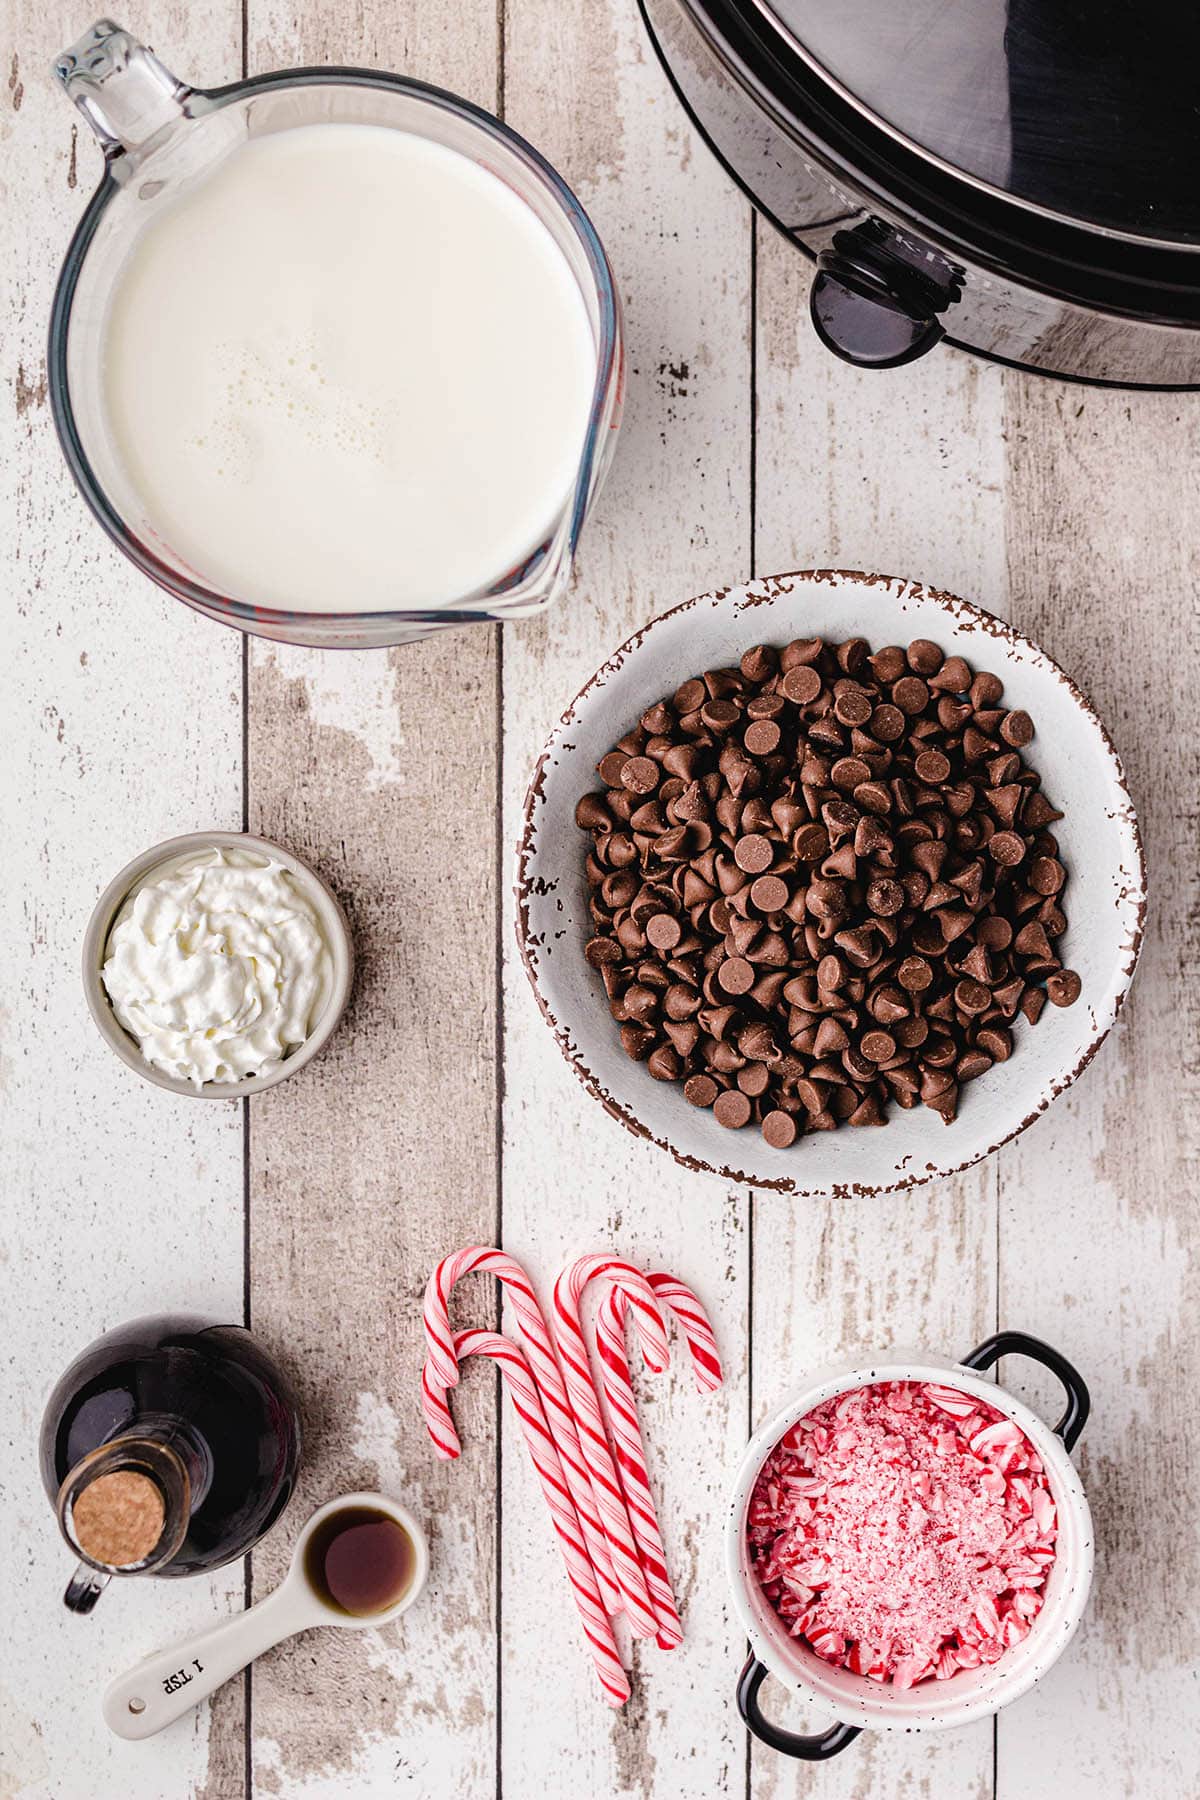 ingredients for Crockpot Peppermint Hot Chocolate